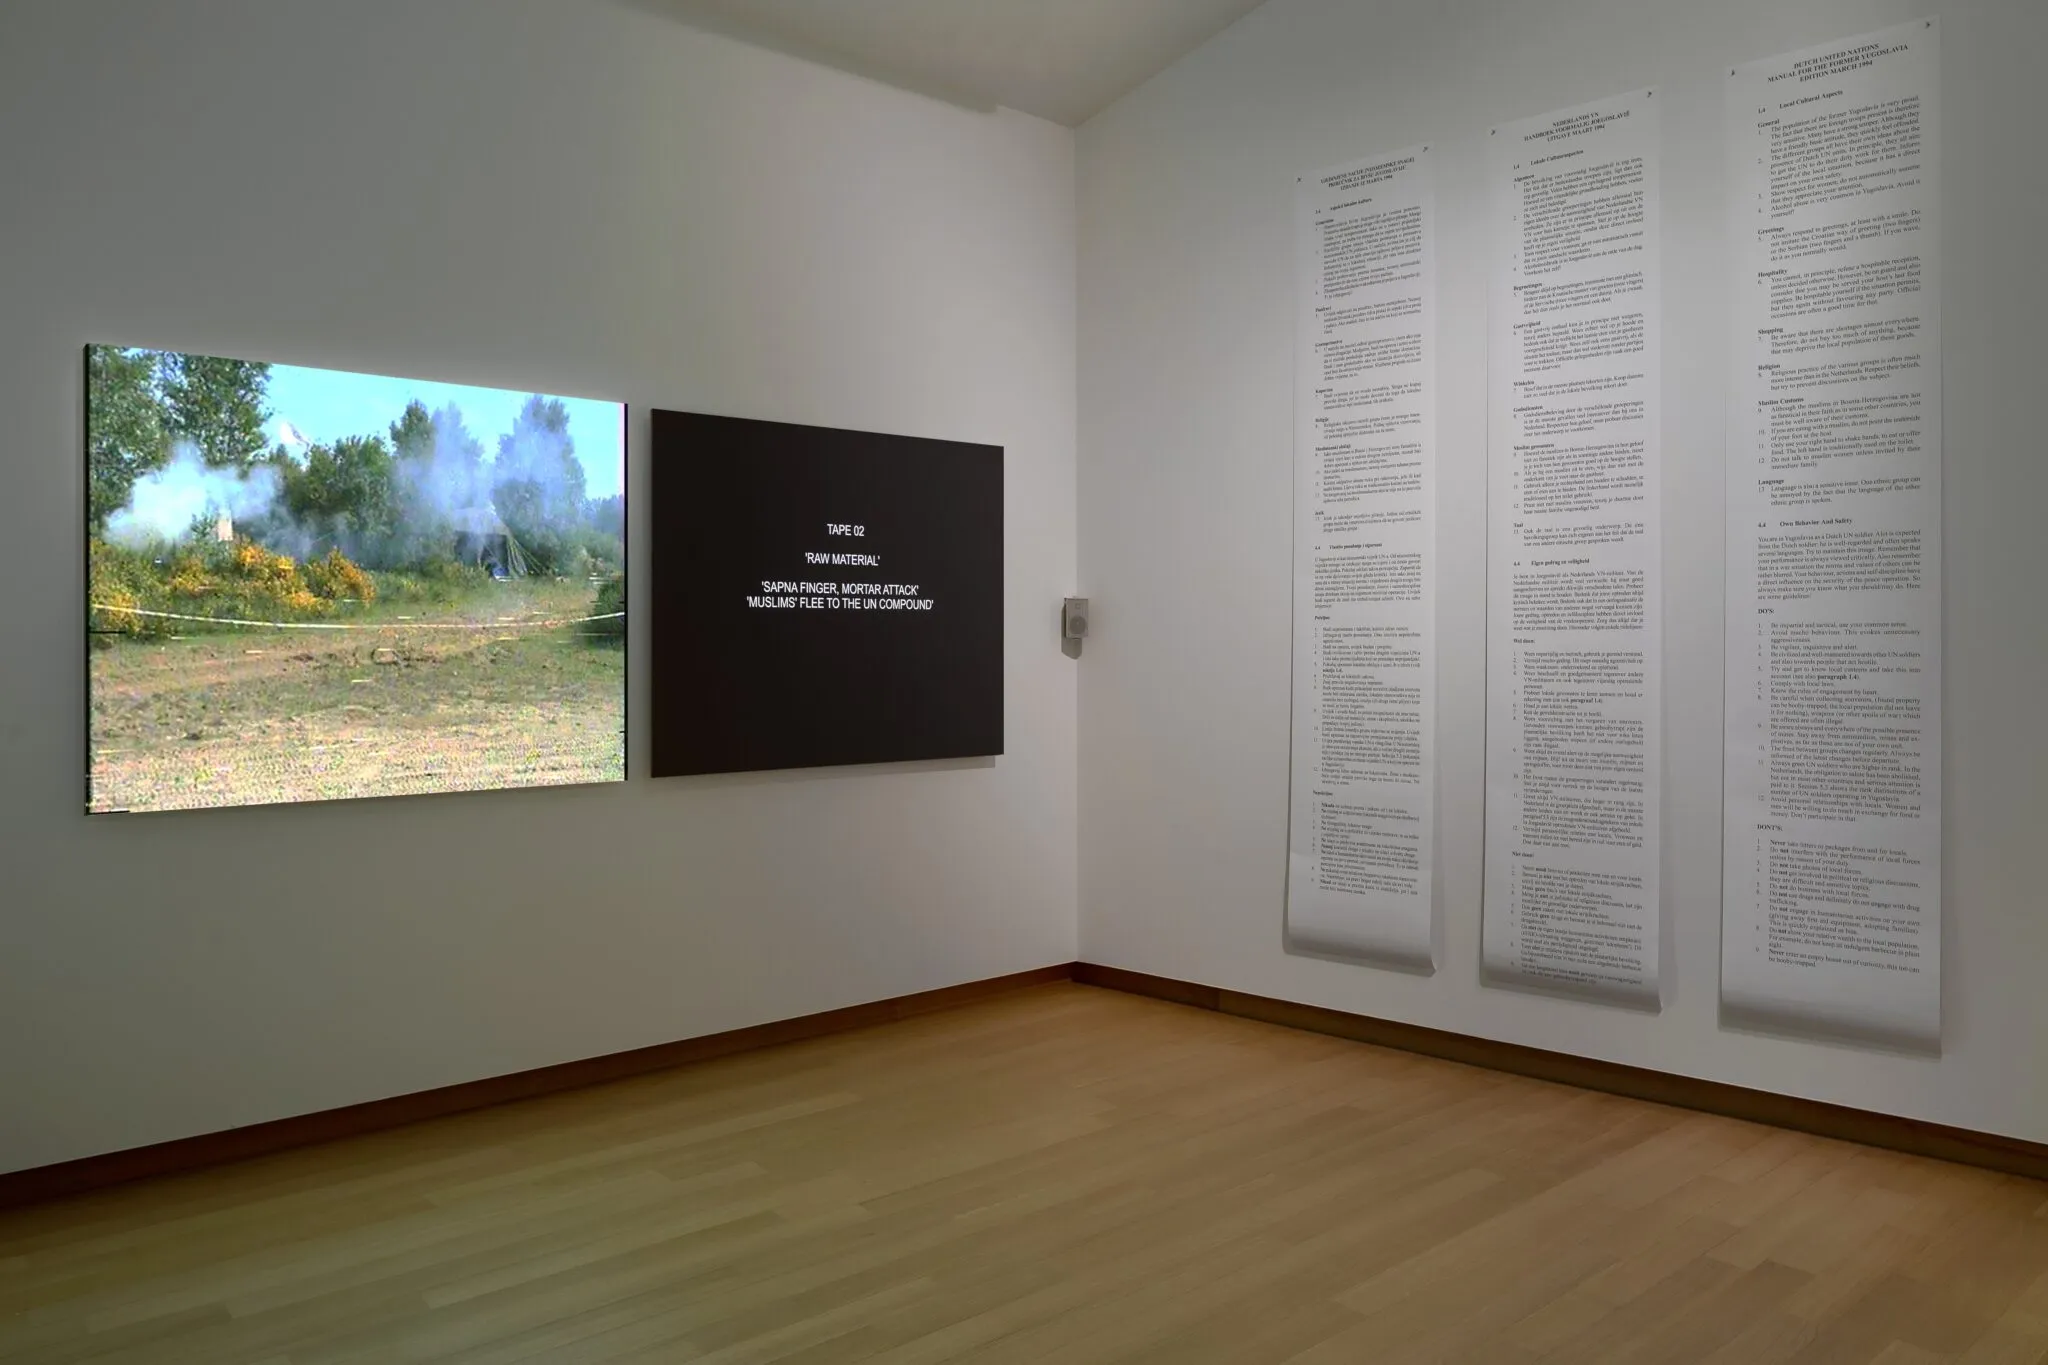 Two screens on a wall and three long sheets of paper with text hung horizontally on the adjacent wall